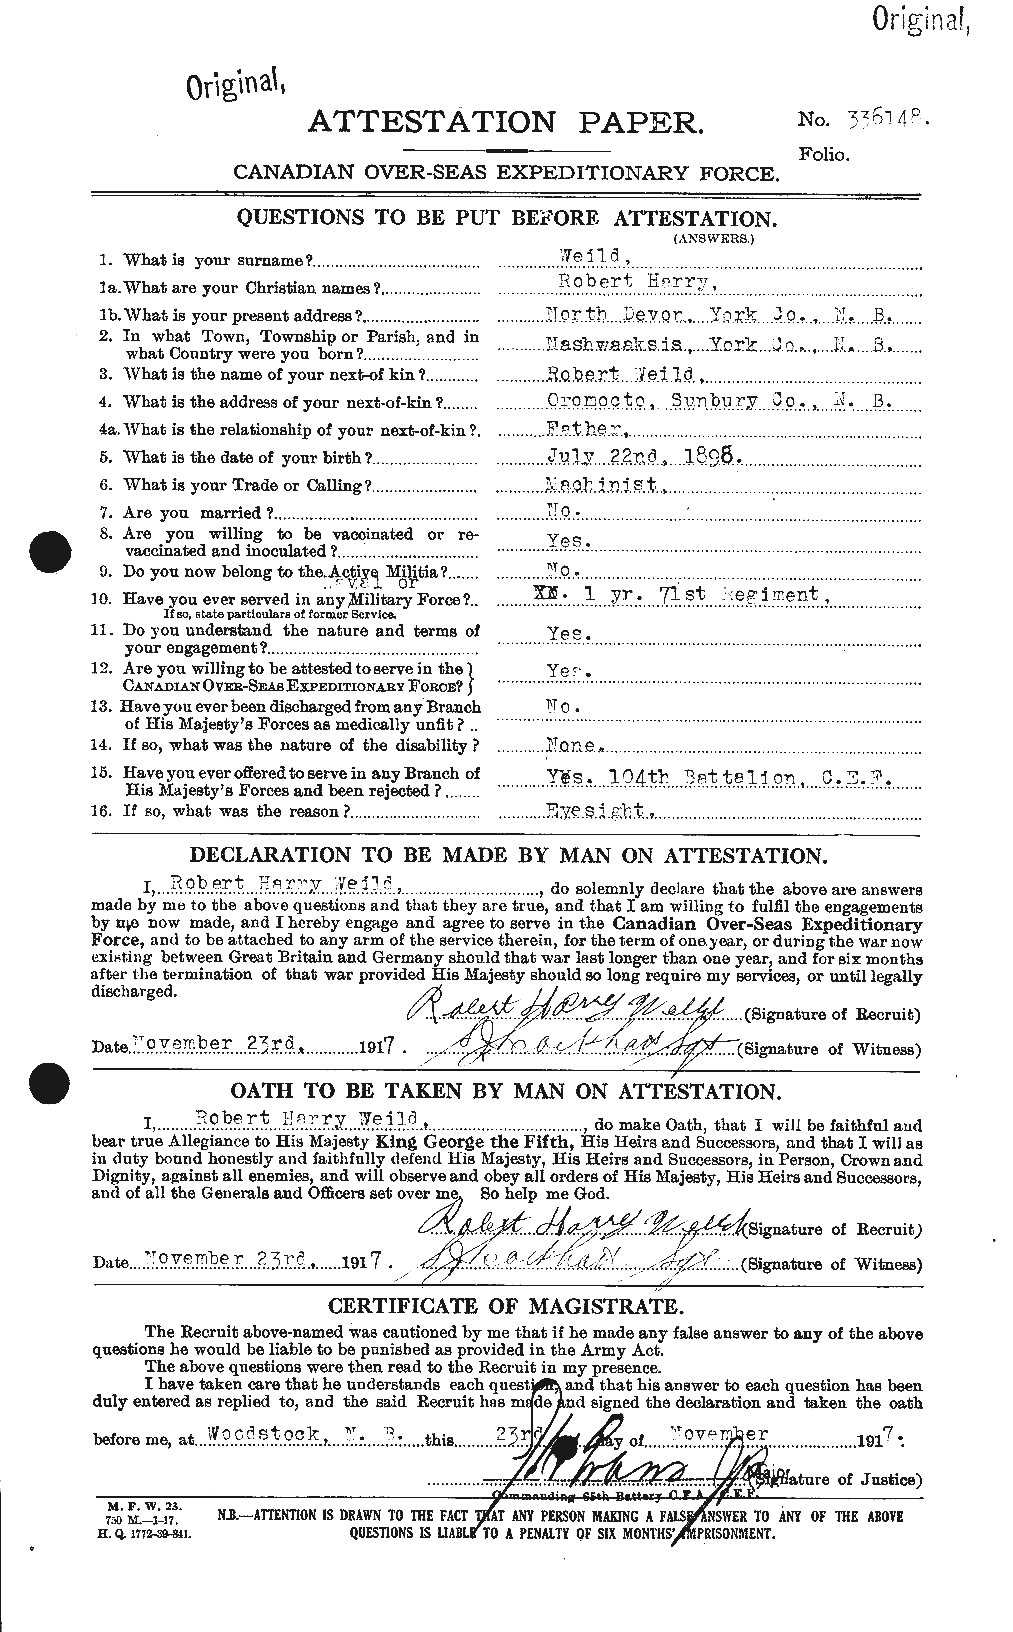 Personnel Records of the First World War - CEF 663663a